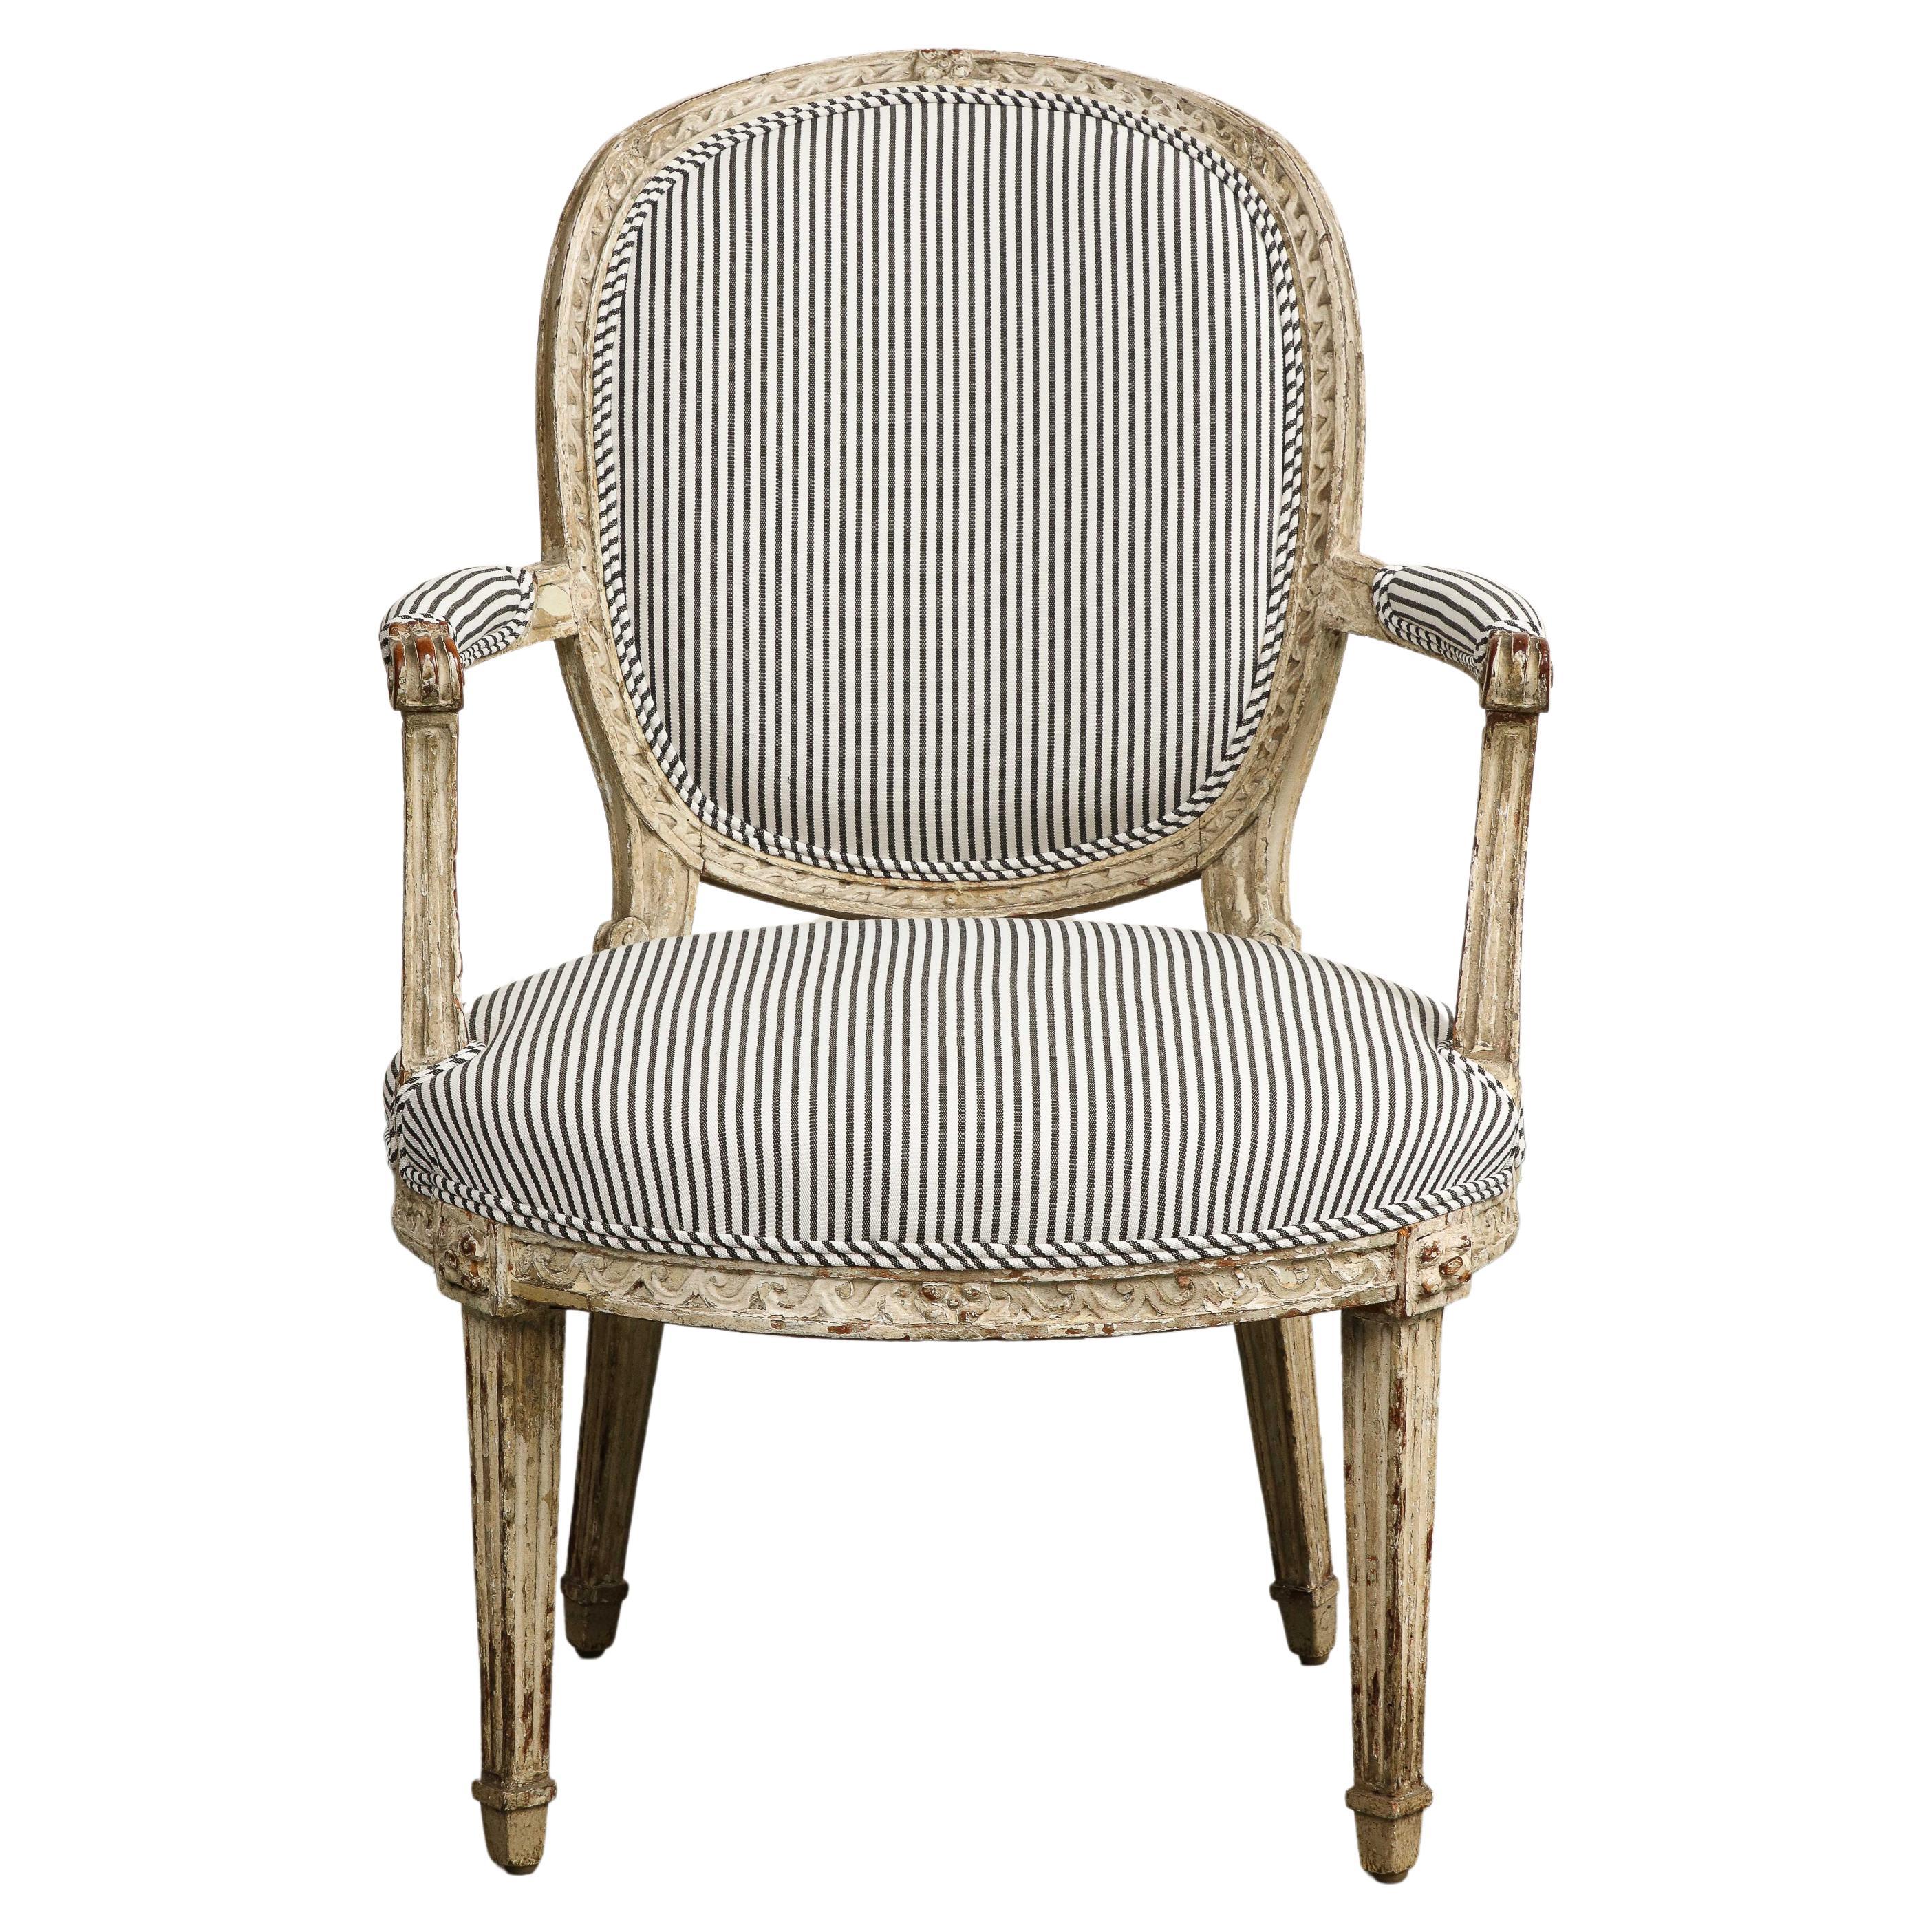 19th Century French Louis XVI Style Fauteuil armchair, with carved tapered legs, retaining old traces of paint over exposed wood. New striped linen upholstery done in 2022, with self-welt edges; the chair has not been used with the new fabric.